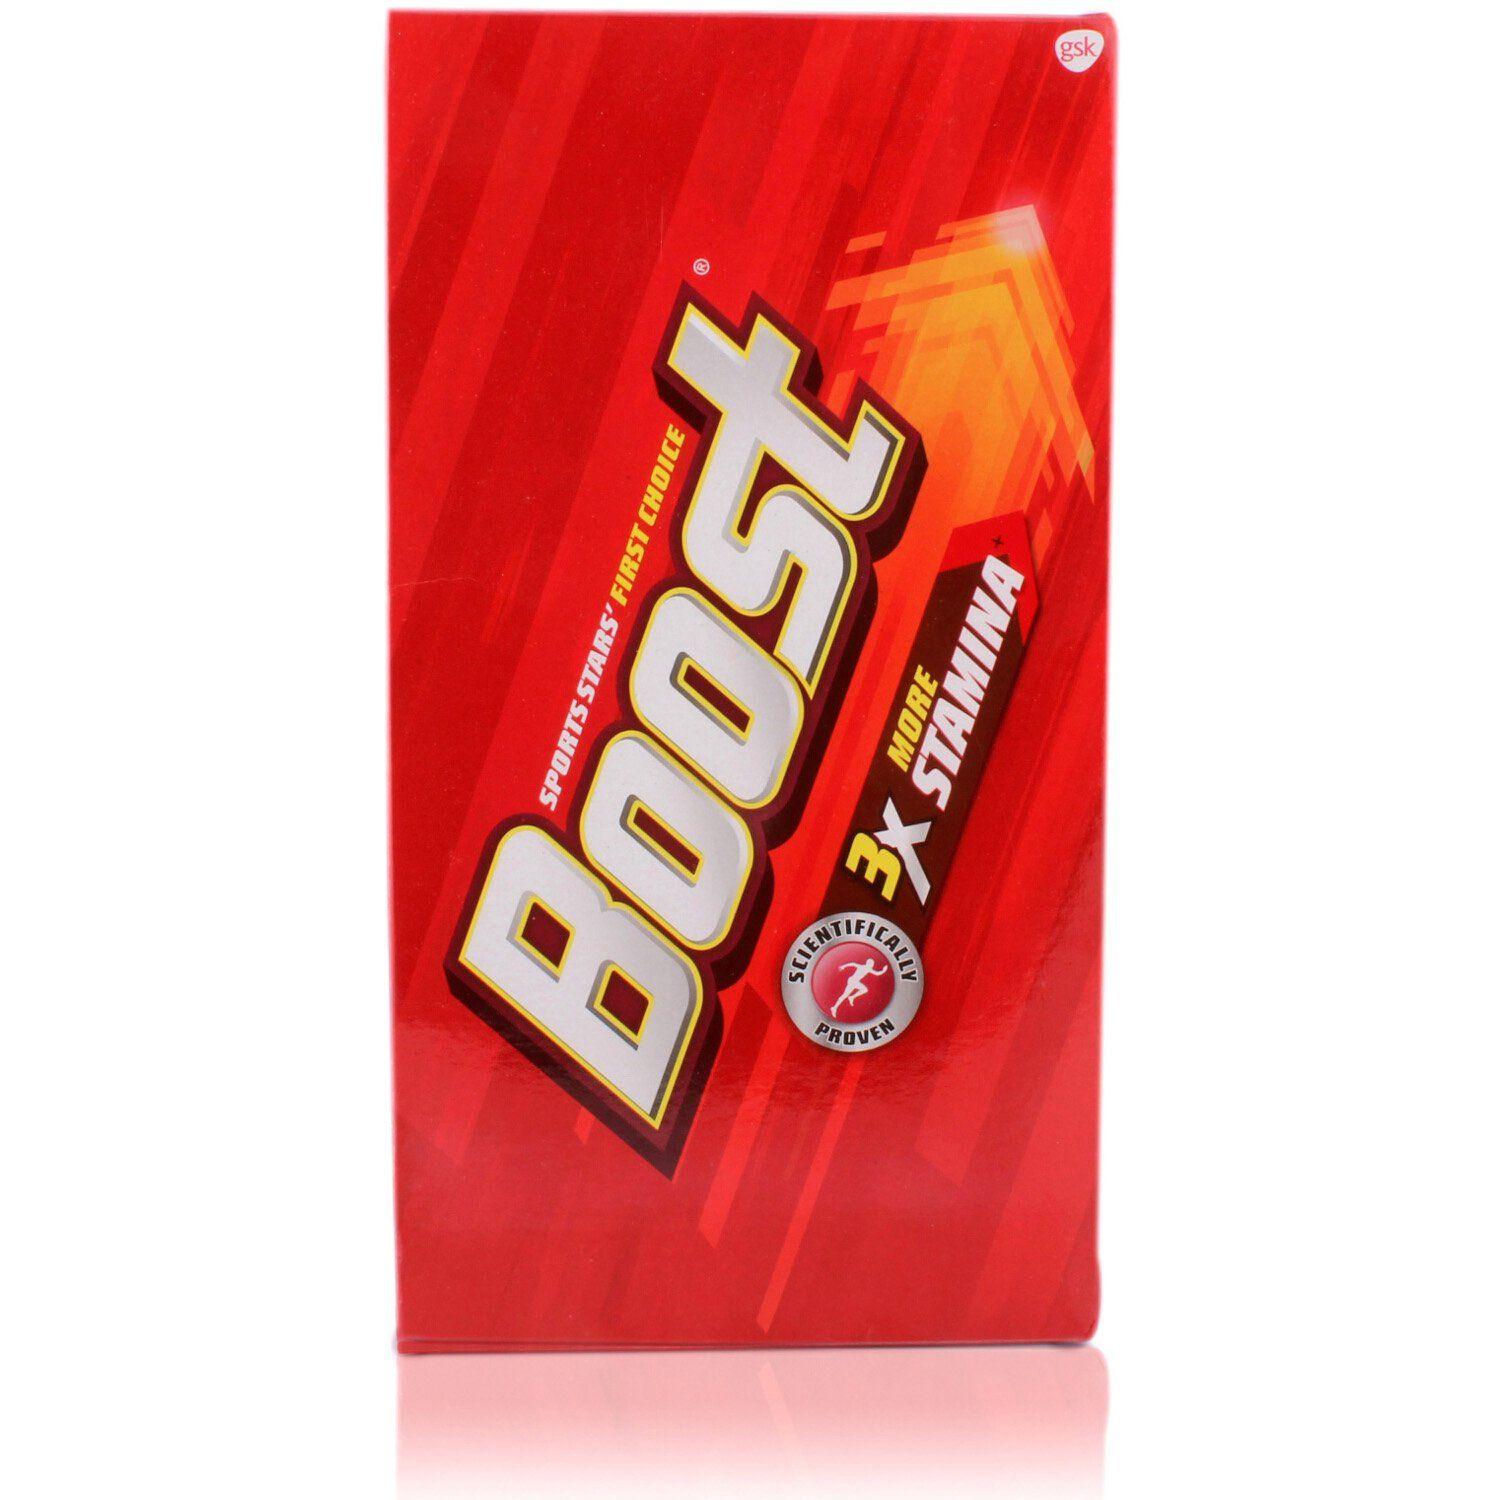 Boost Drink Logo - Boost with Envita Nutrients Health Drink, 750g: Amazon.in